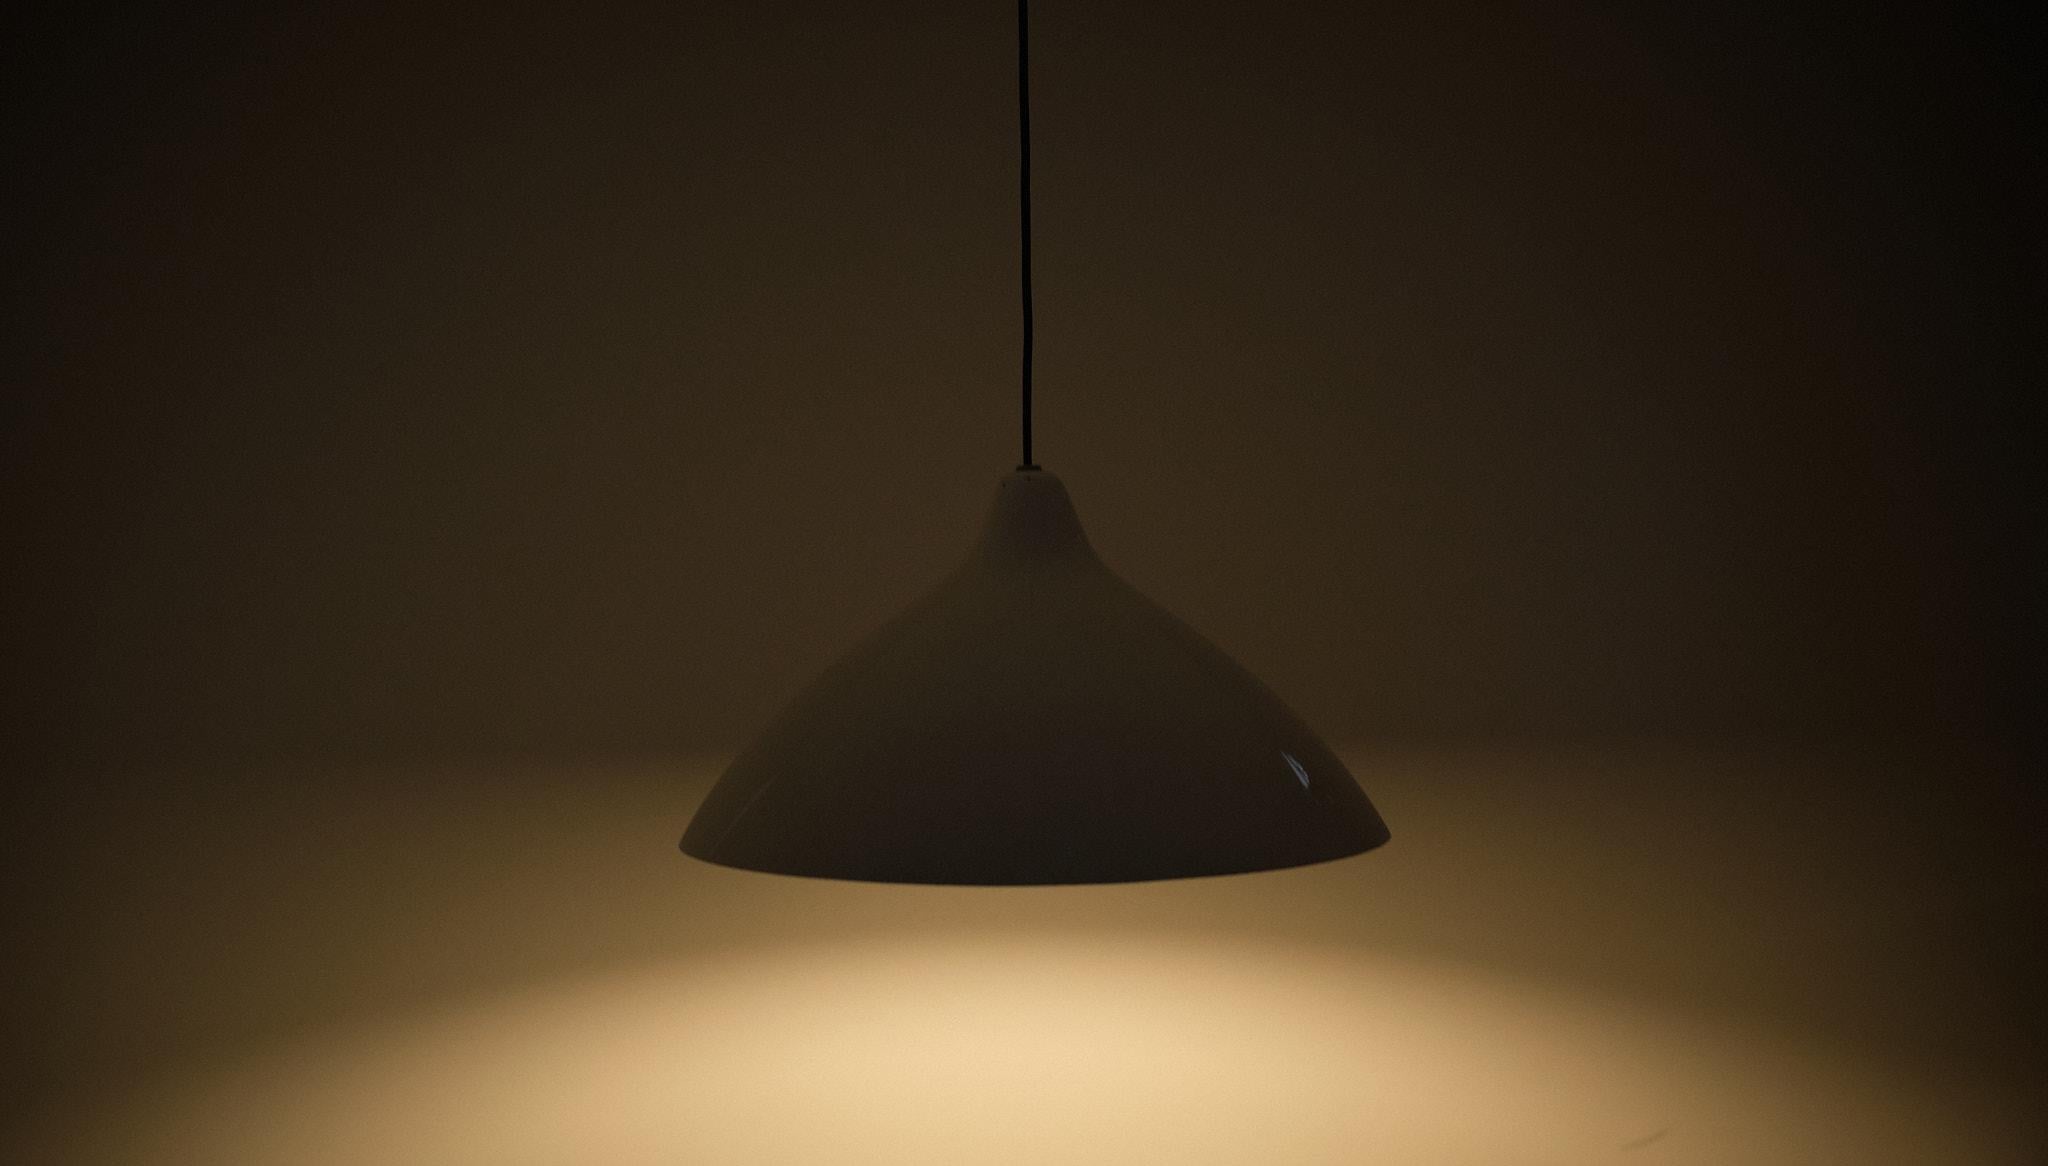  White Pendant Lamp by Lisa Johansson Pape for Orno, Finland 1950s  For Sale 1